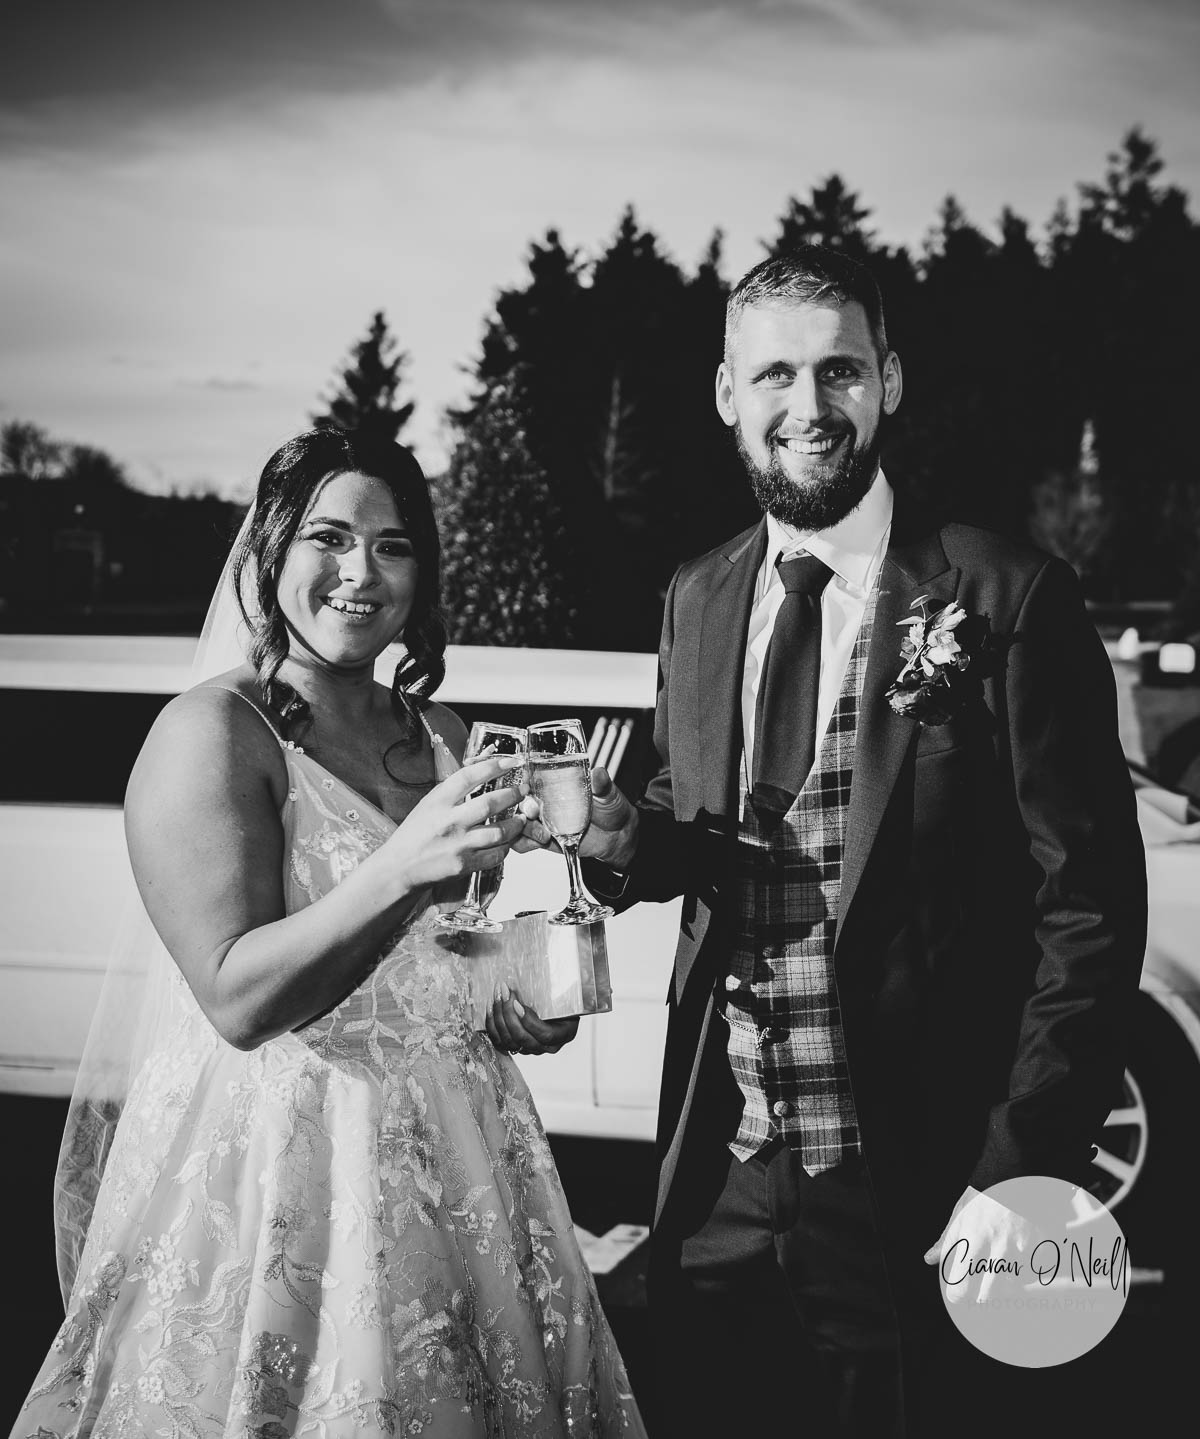 Bride & Groom sharing a glass of bubbly upon arrival at the hotel